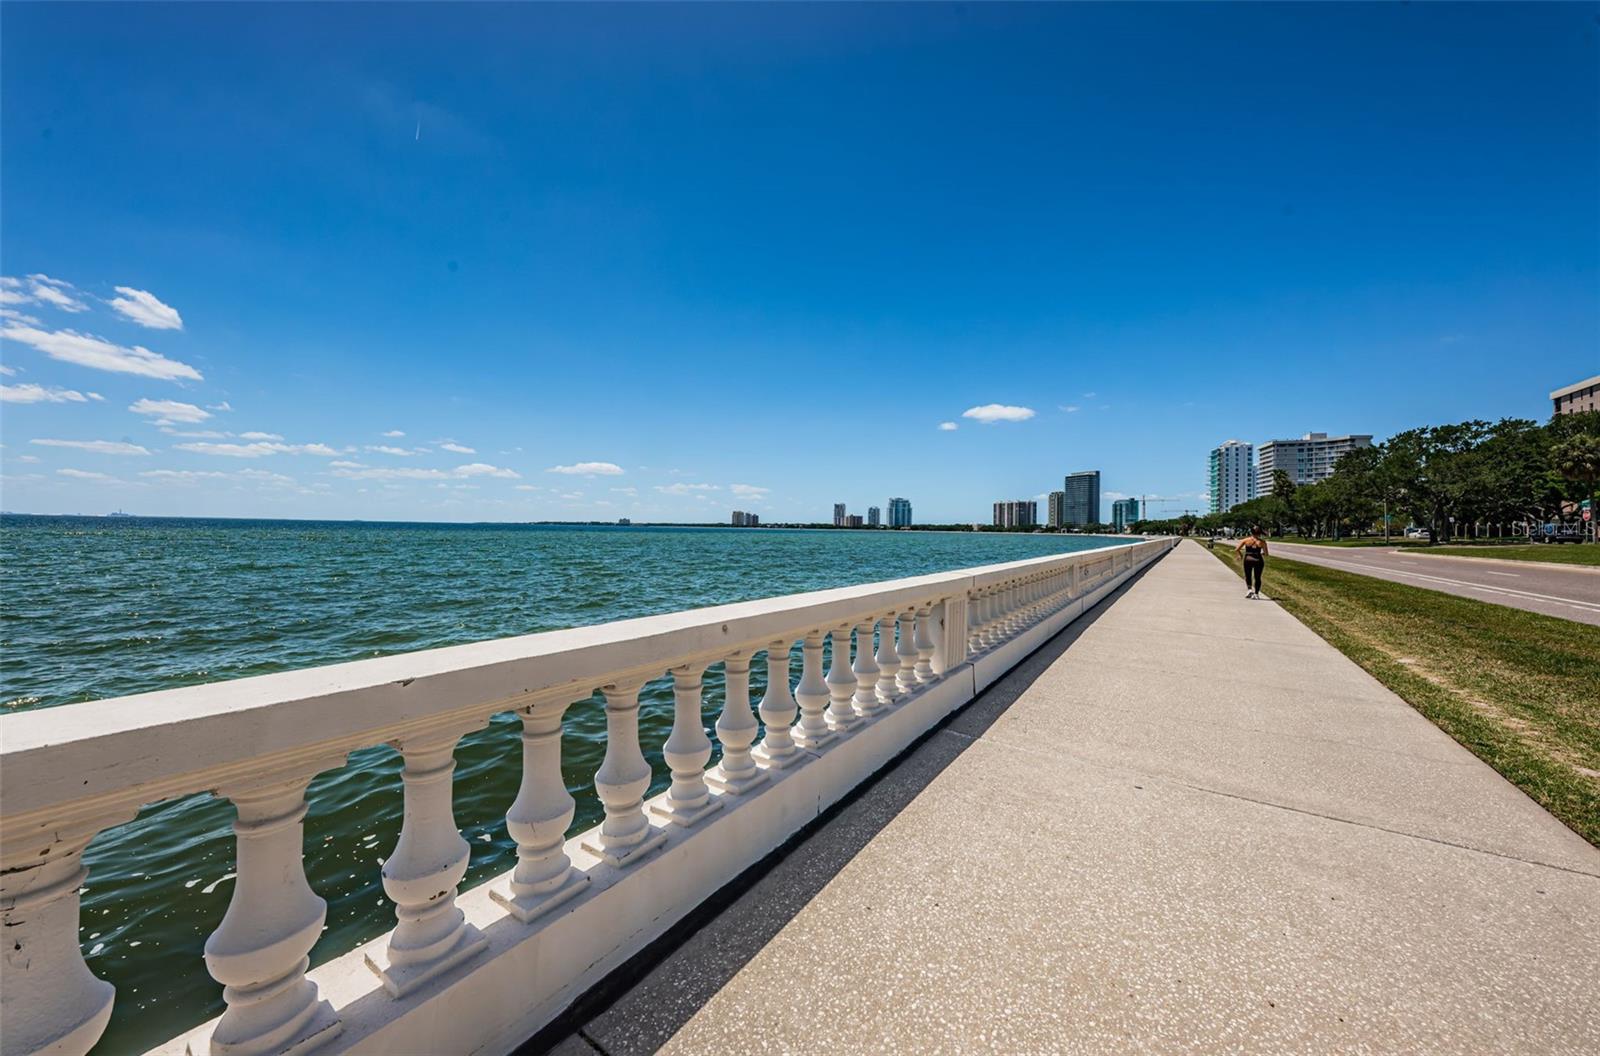 Literally steps out to exercise on Bayshore Boulevard.